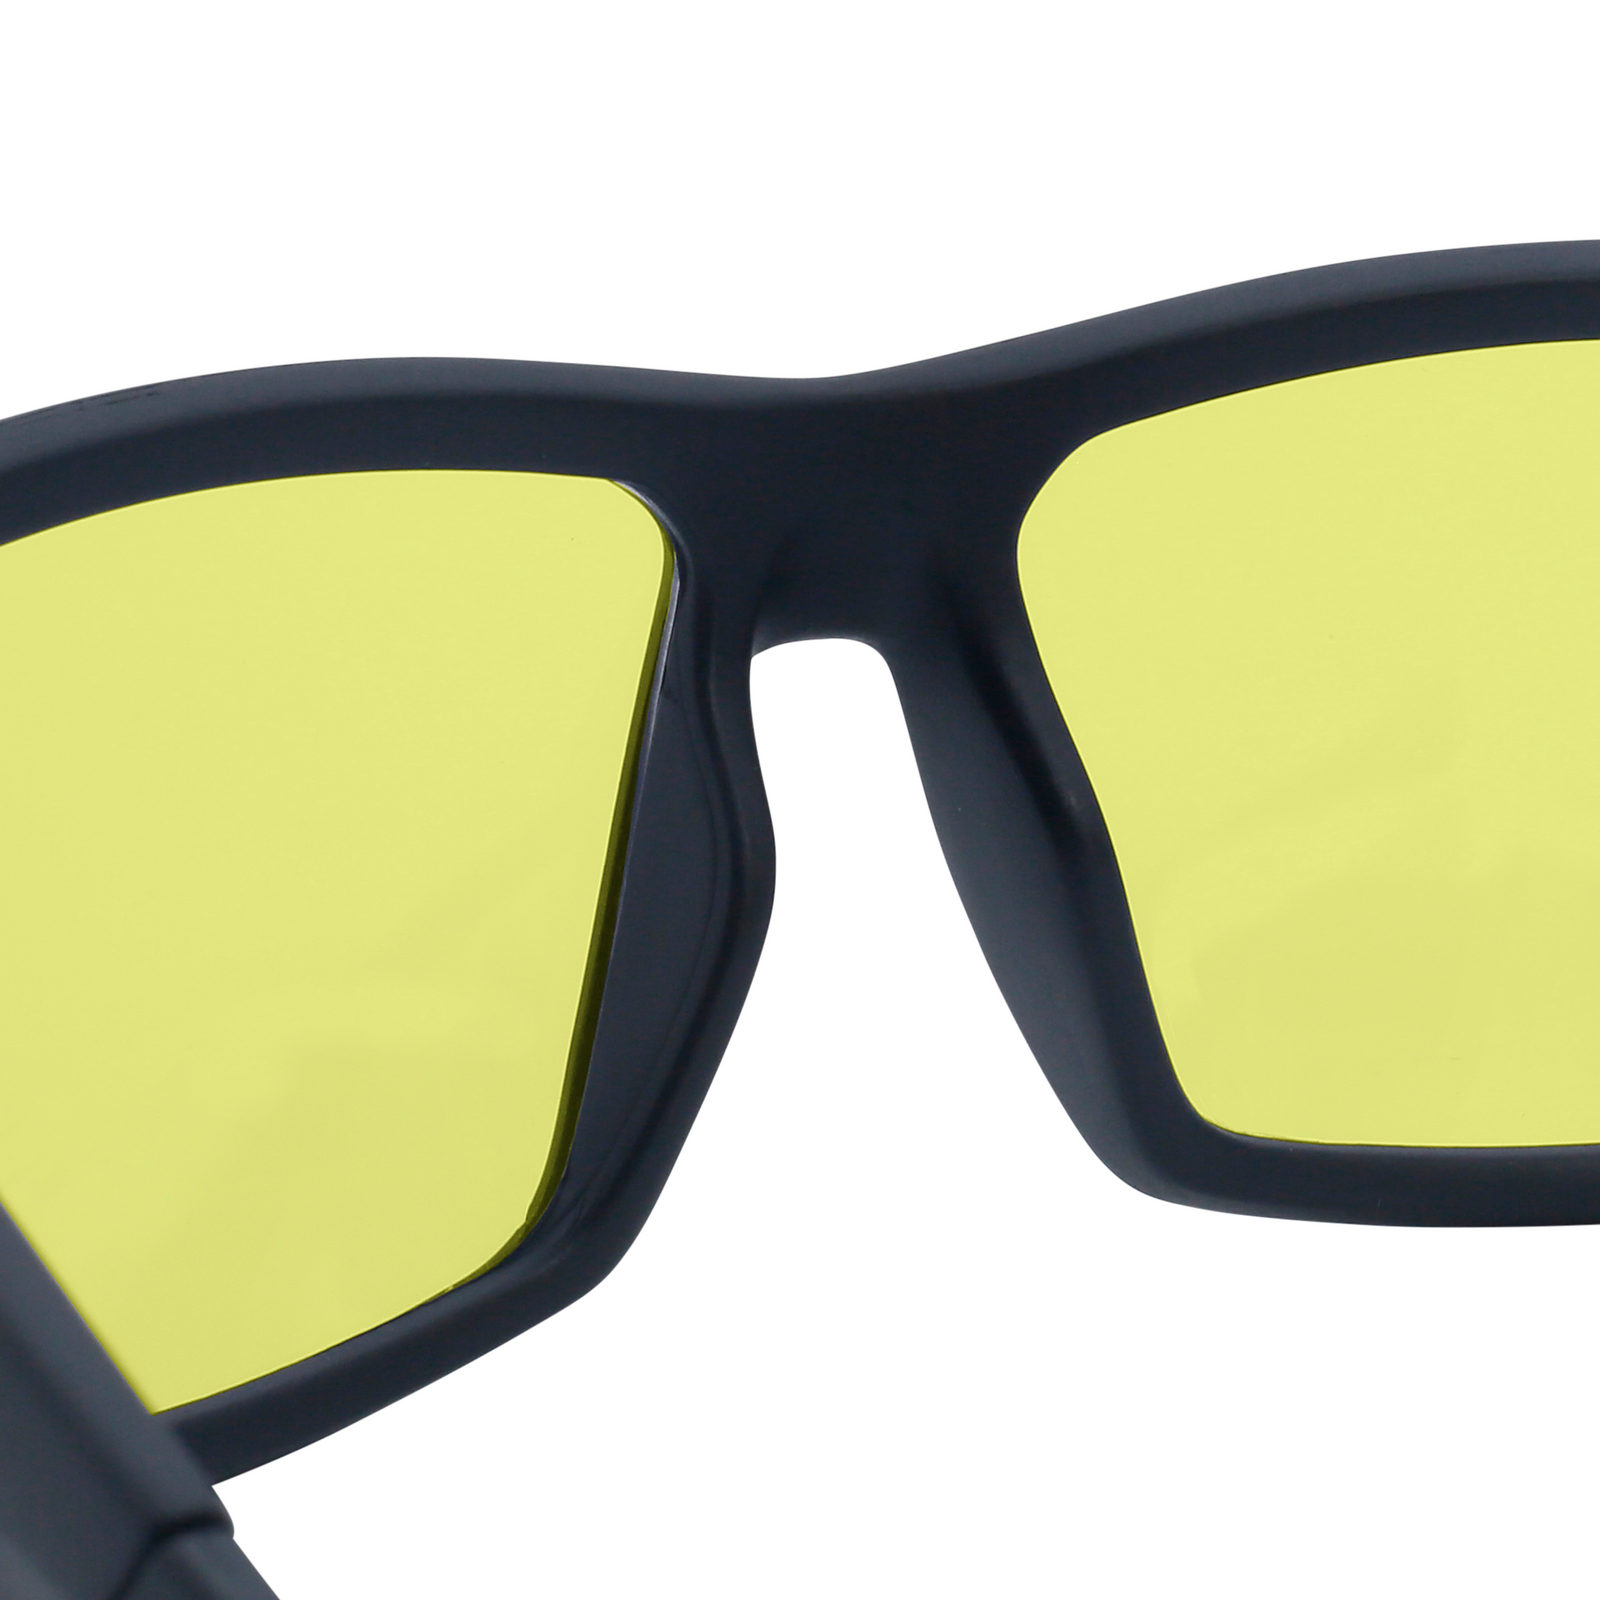 Close up image showing the nose bridge of the JORESTECH ANSI compliant yellow safety glasses